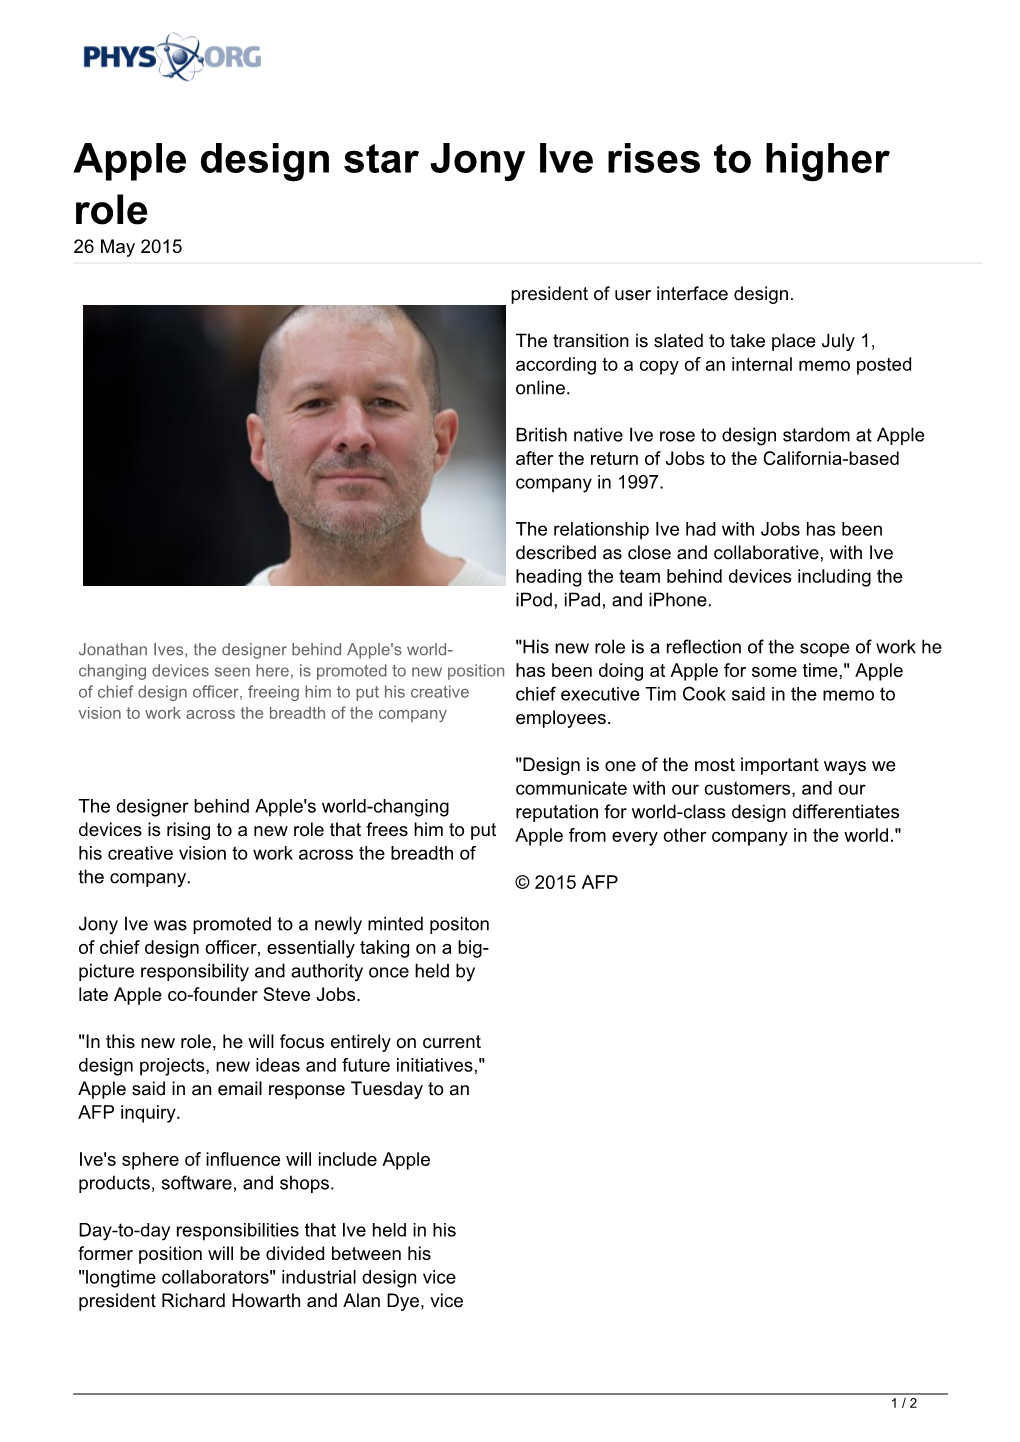 Apple Design Star Jony Ive Rises to Higher Role 26 May 2015